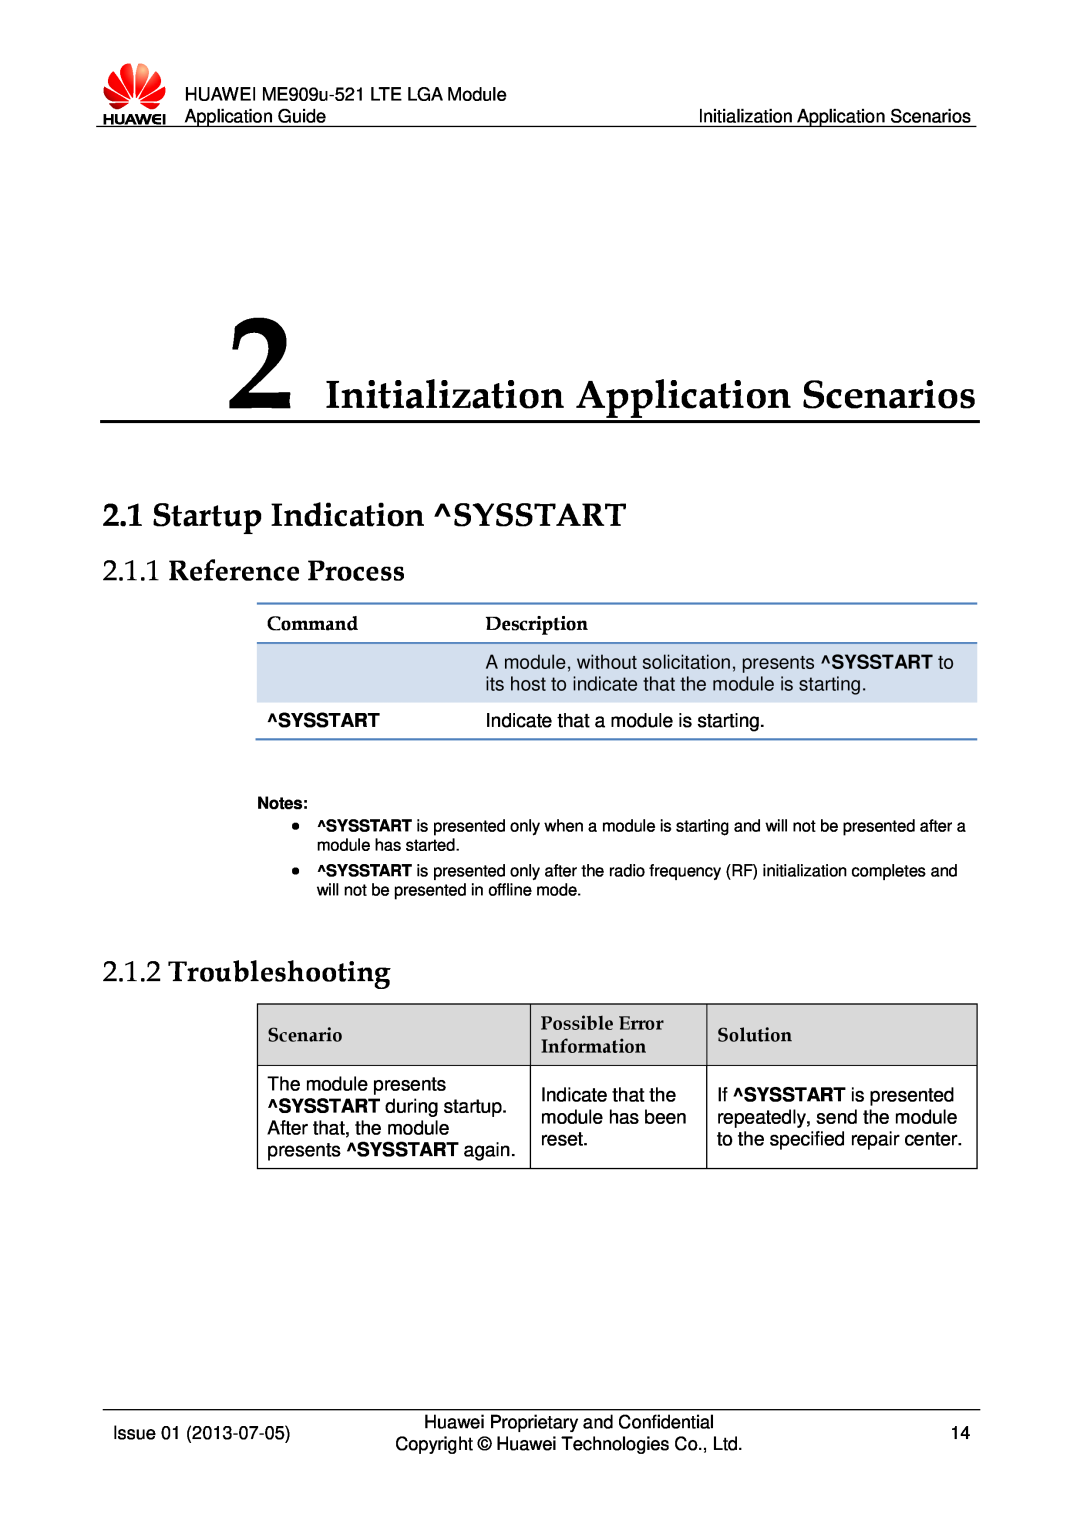 Huawei ME909u-521 Initialization Application Scenarios, Startup Indication SYSSTART, Reference Process, Troubleshooting 